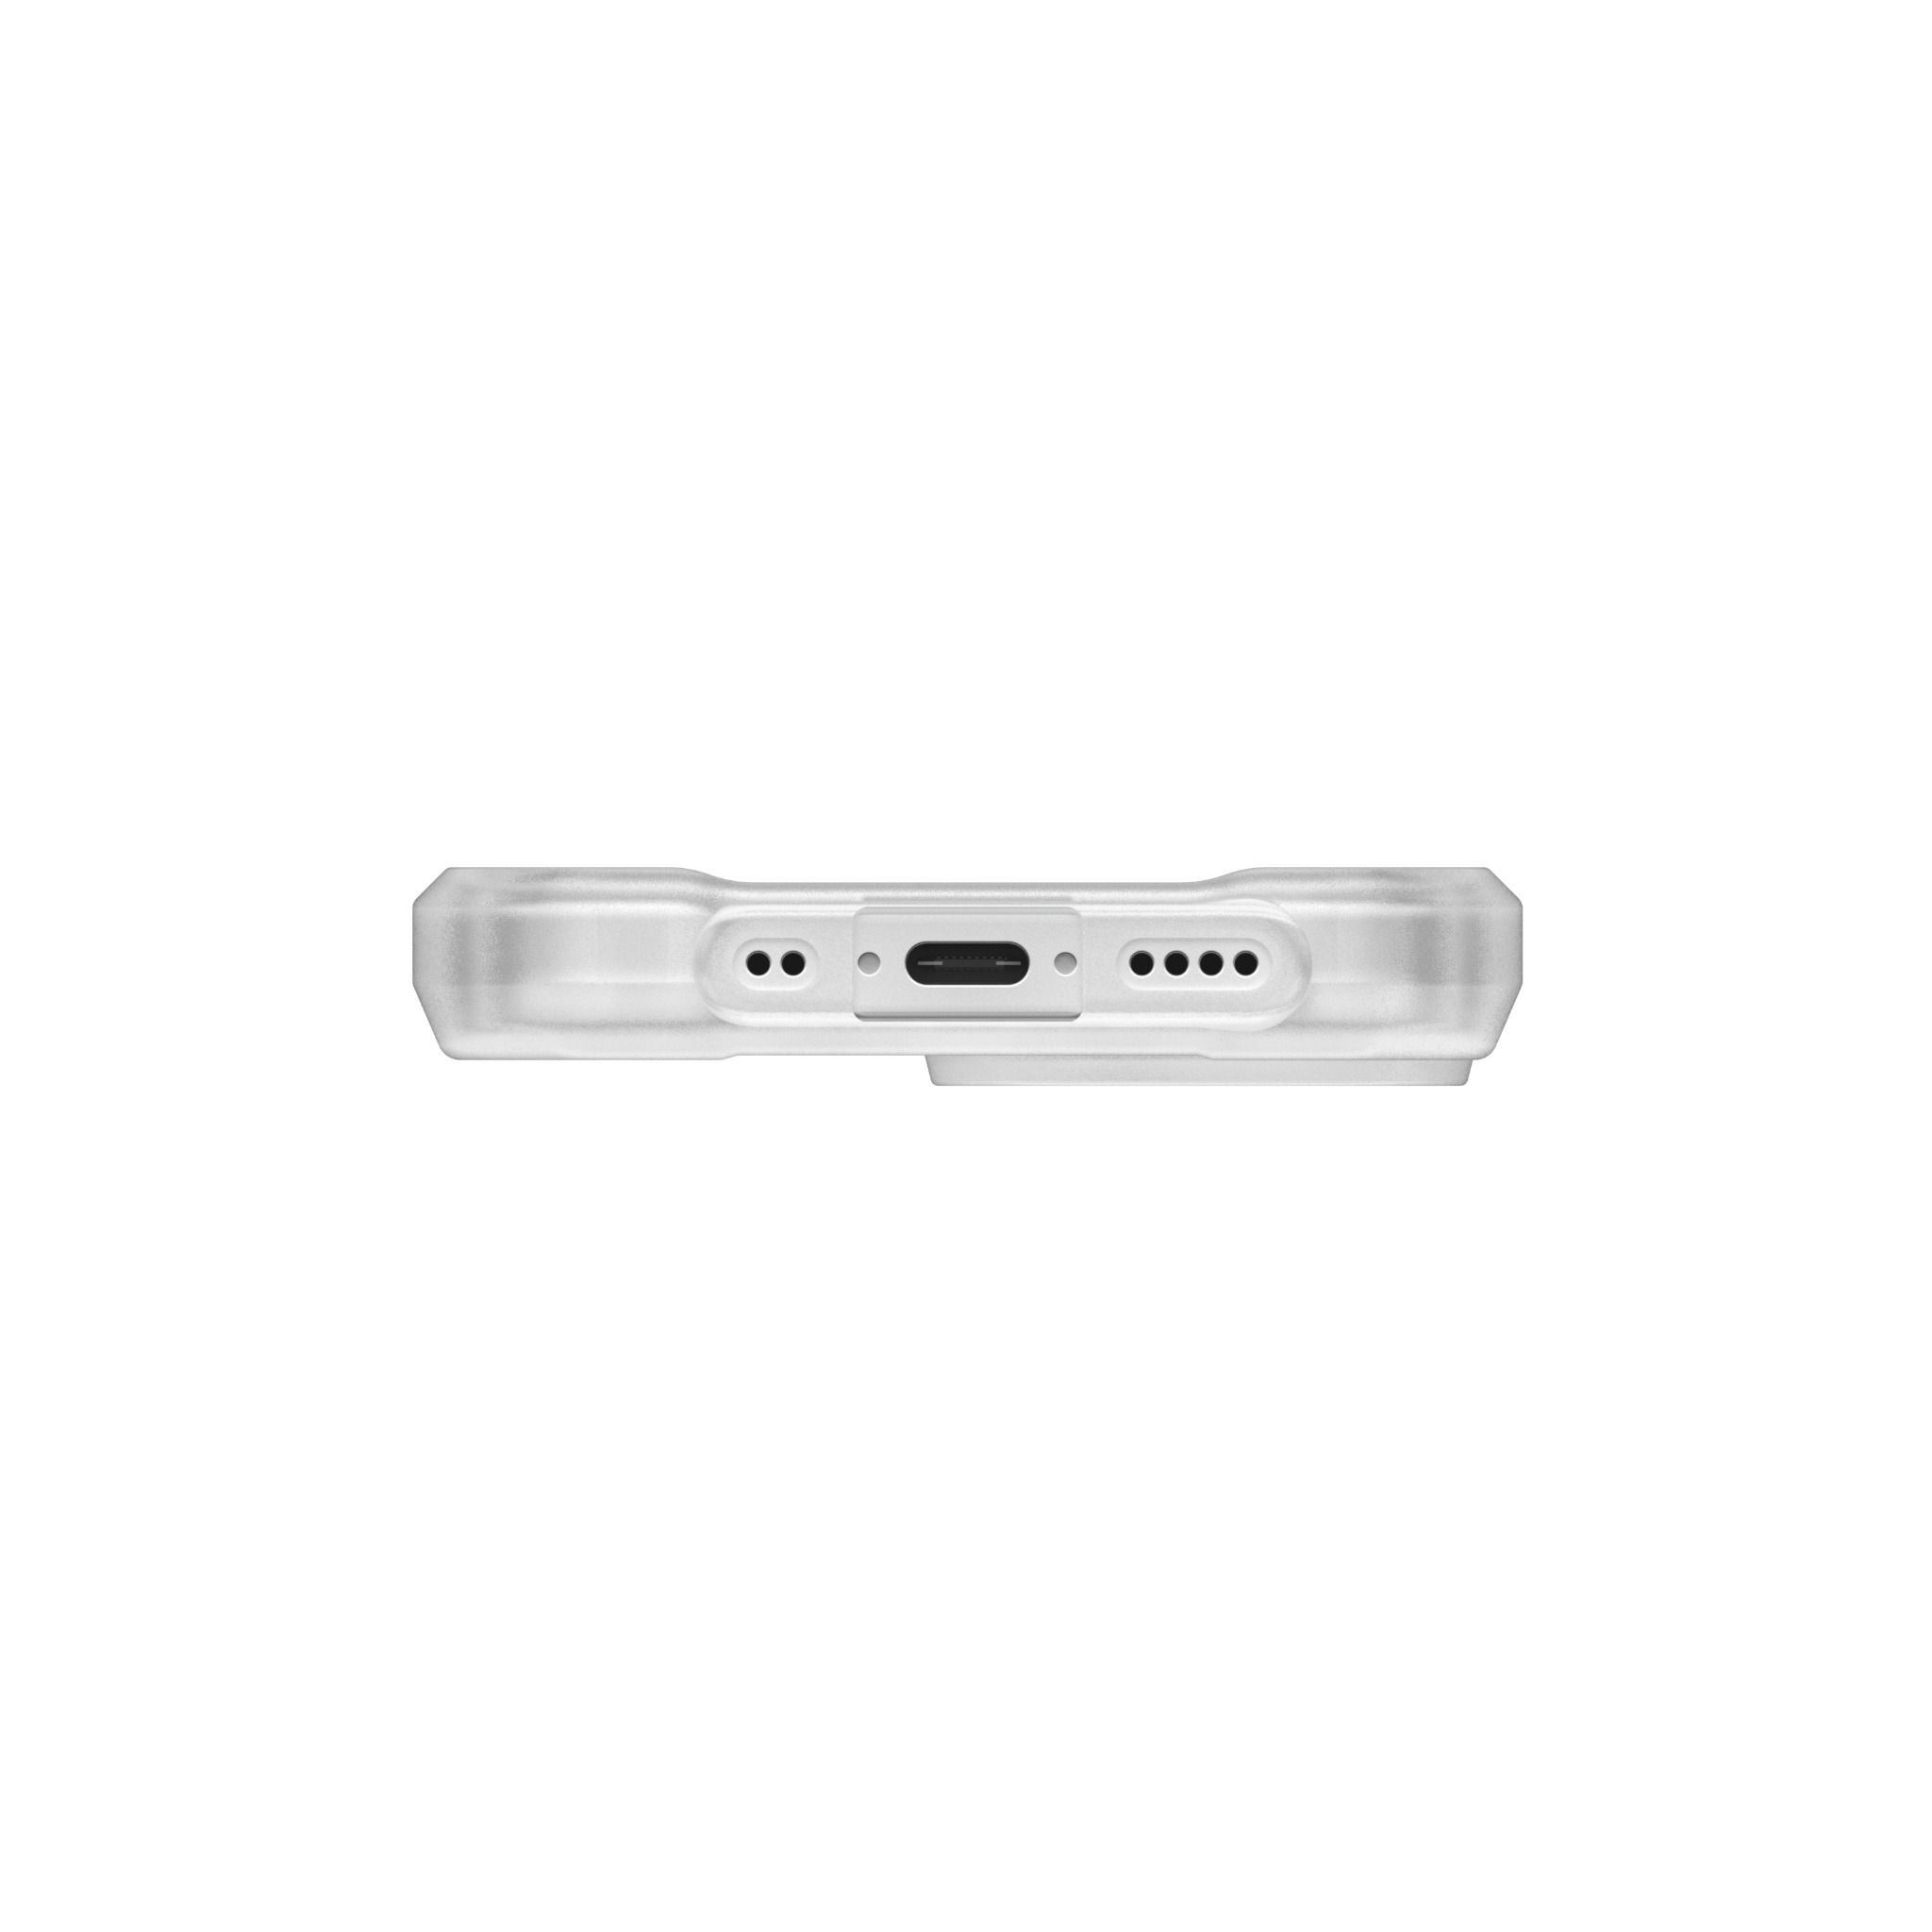  Ốp lưng Essential Armor w MagSafe cho iPhone 13 Mini [5.4 inch] 